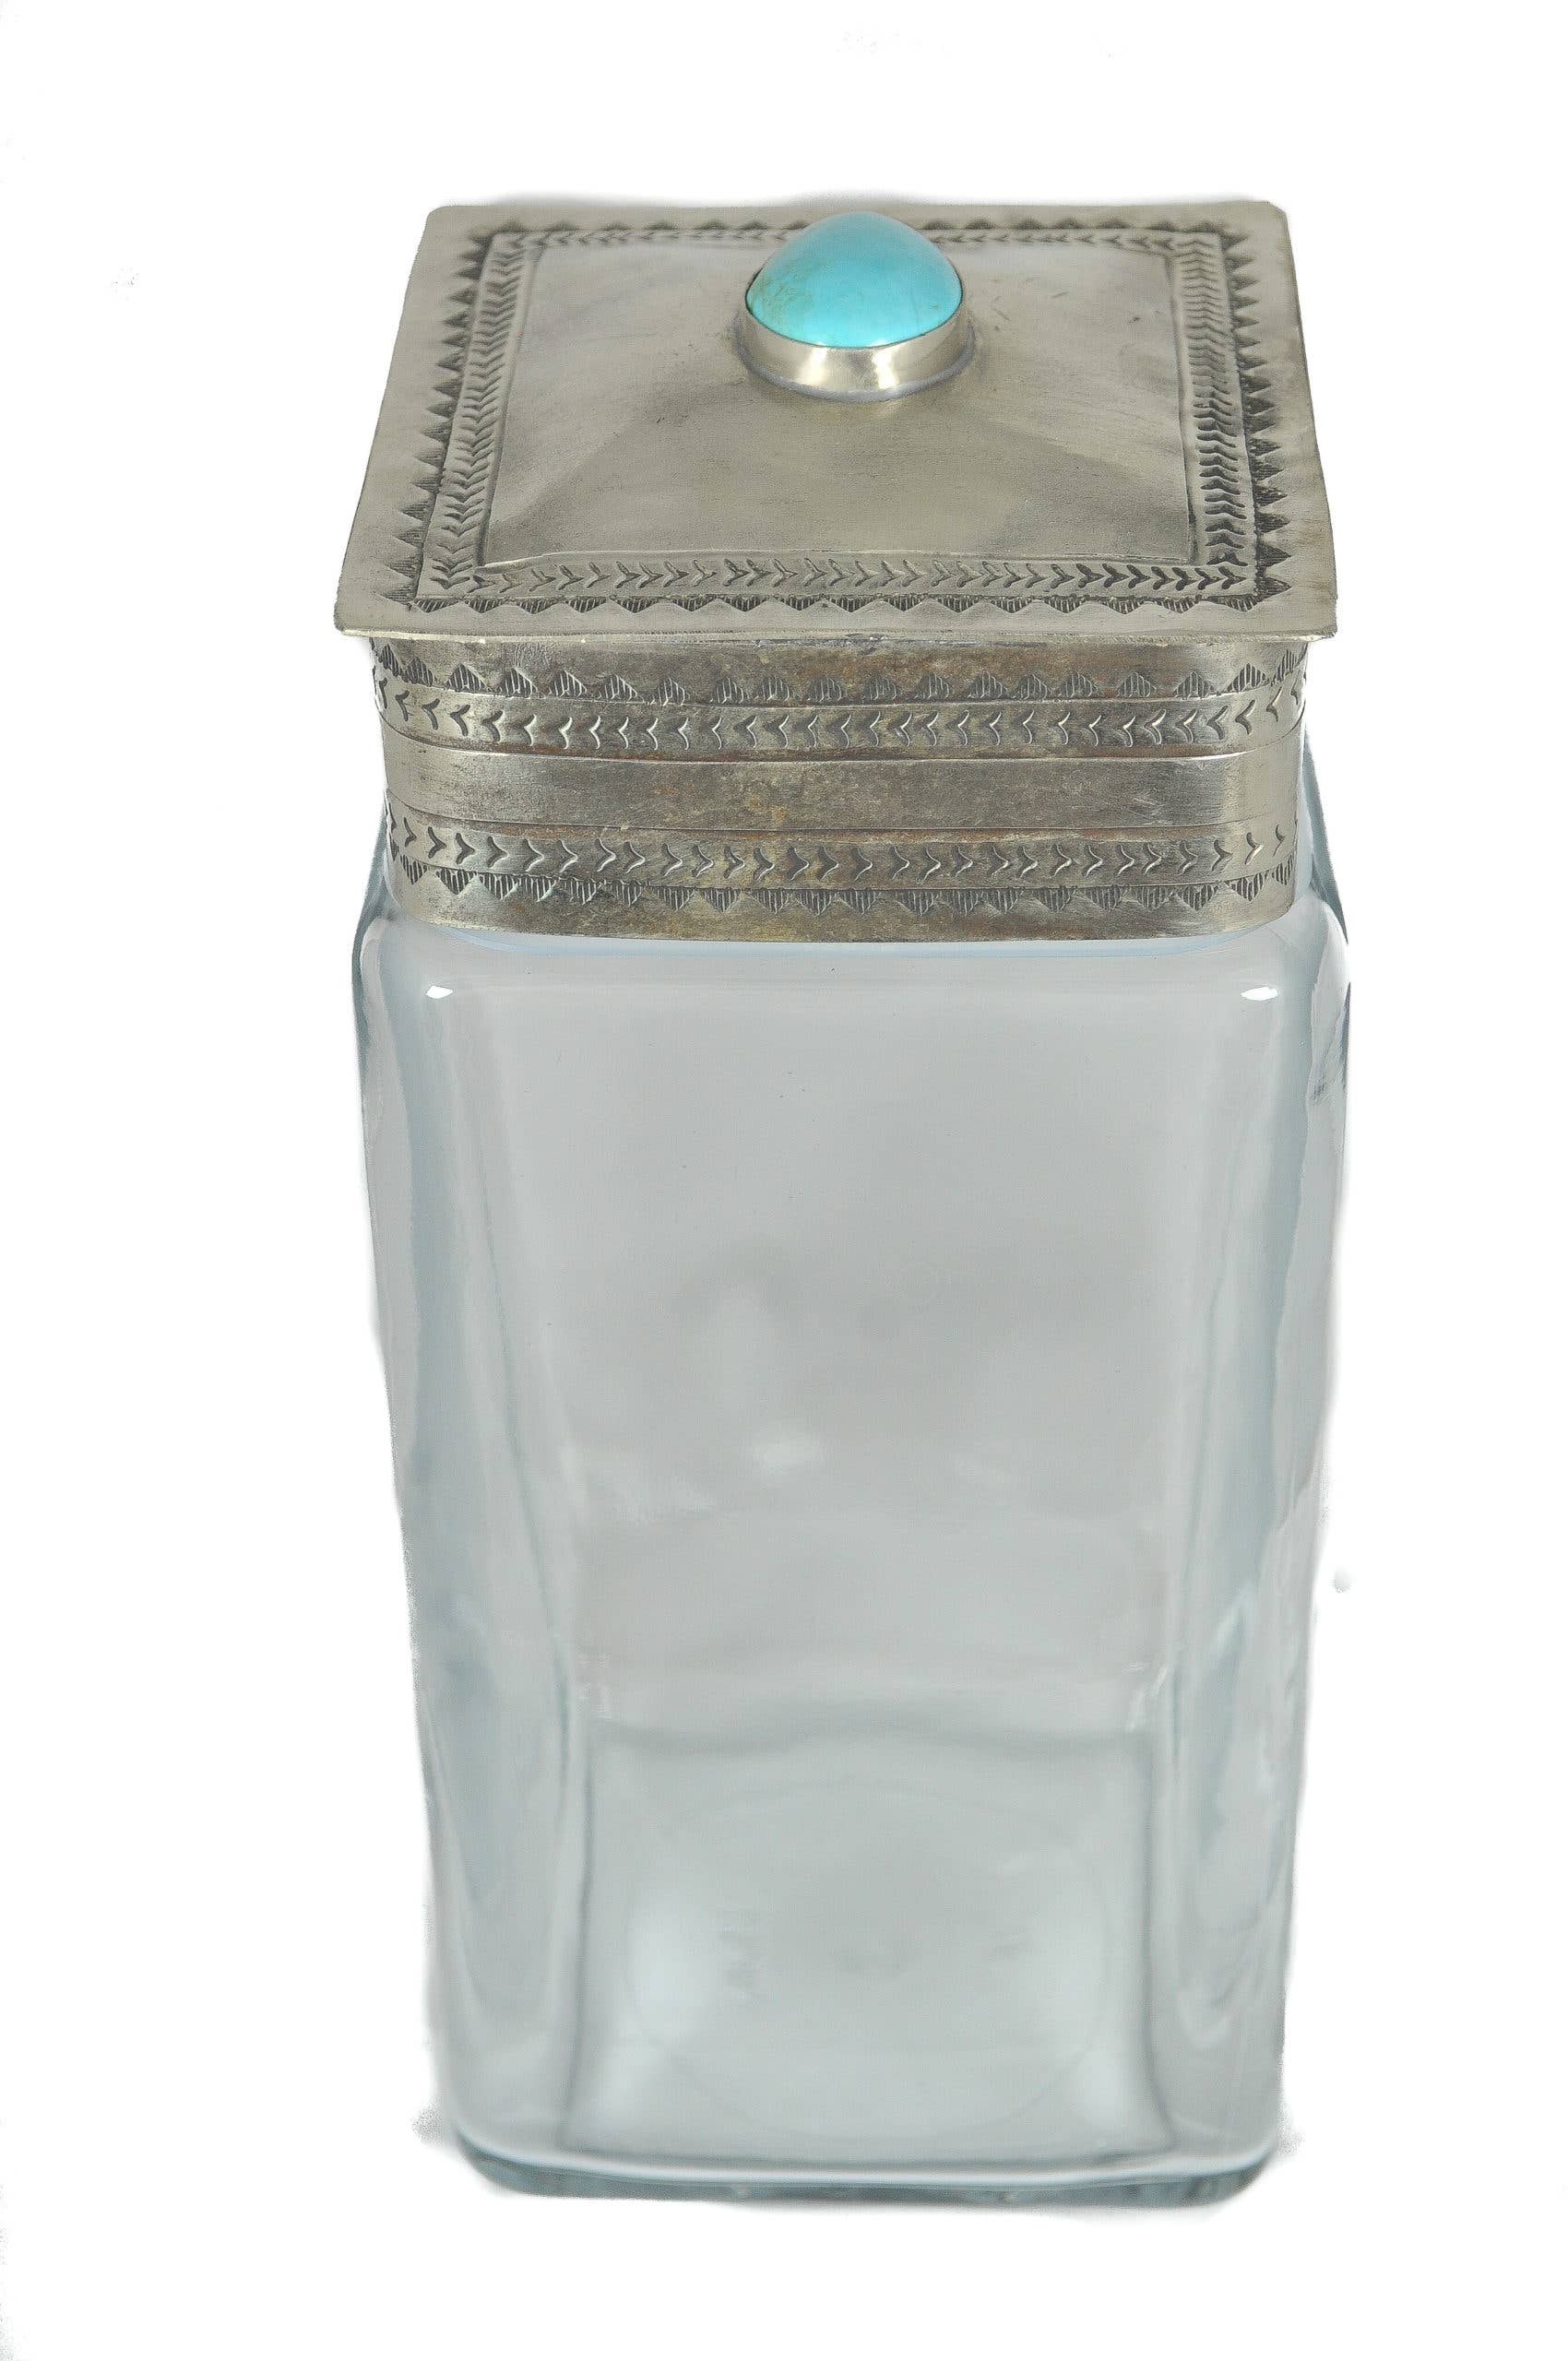 LRG GLASS BOTTOM CANISTER W/ SILVER & TURQ